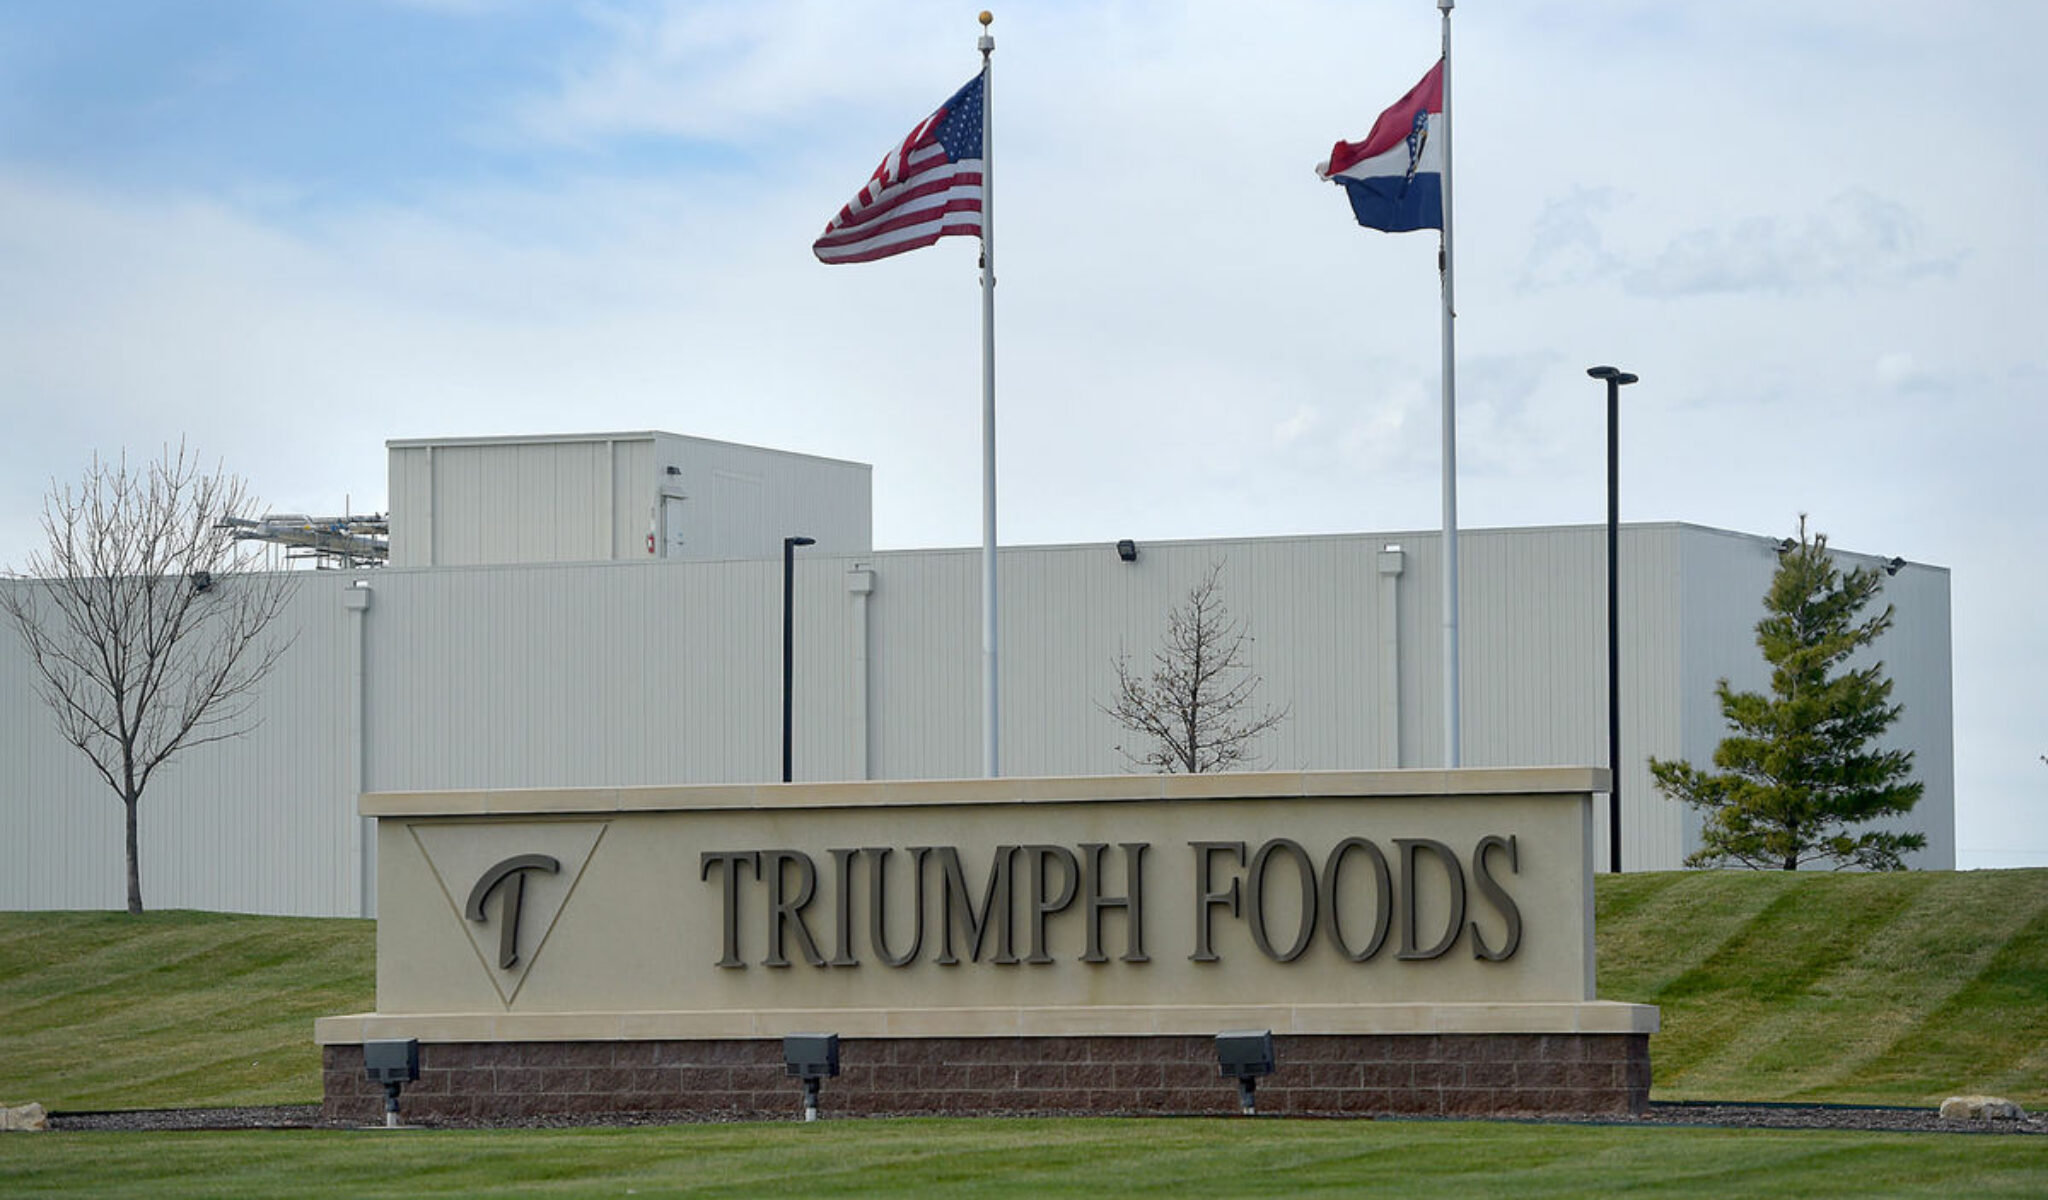 Triumph donates 32,000 pounds of meat to food bank